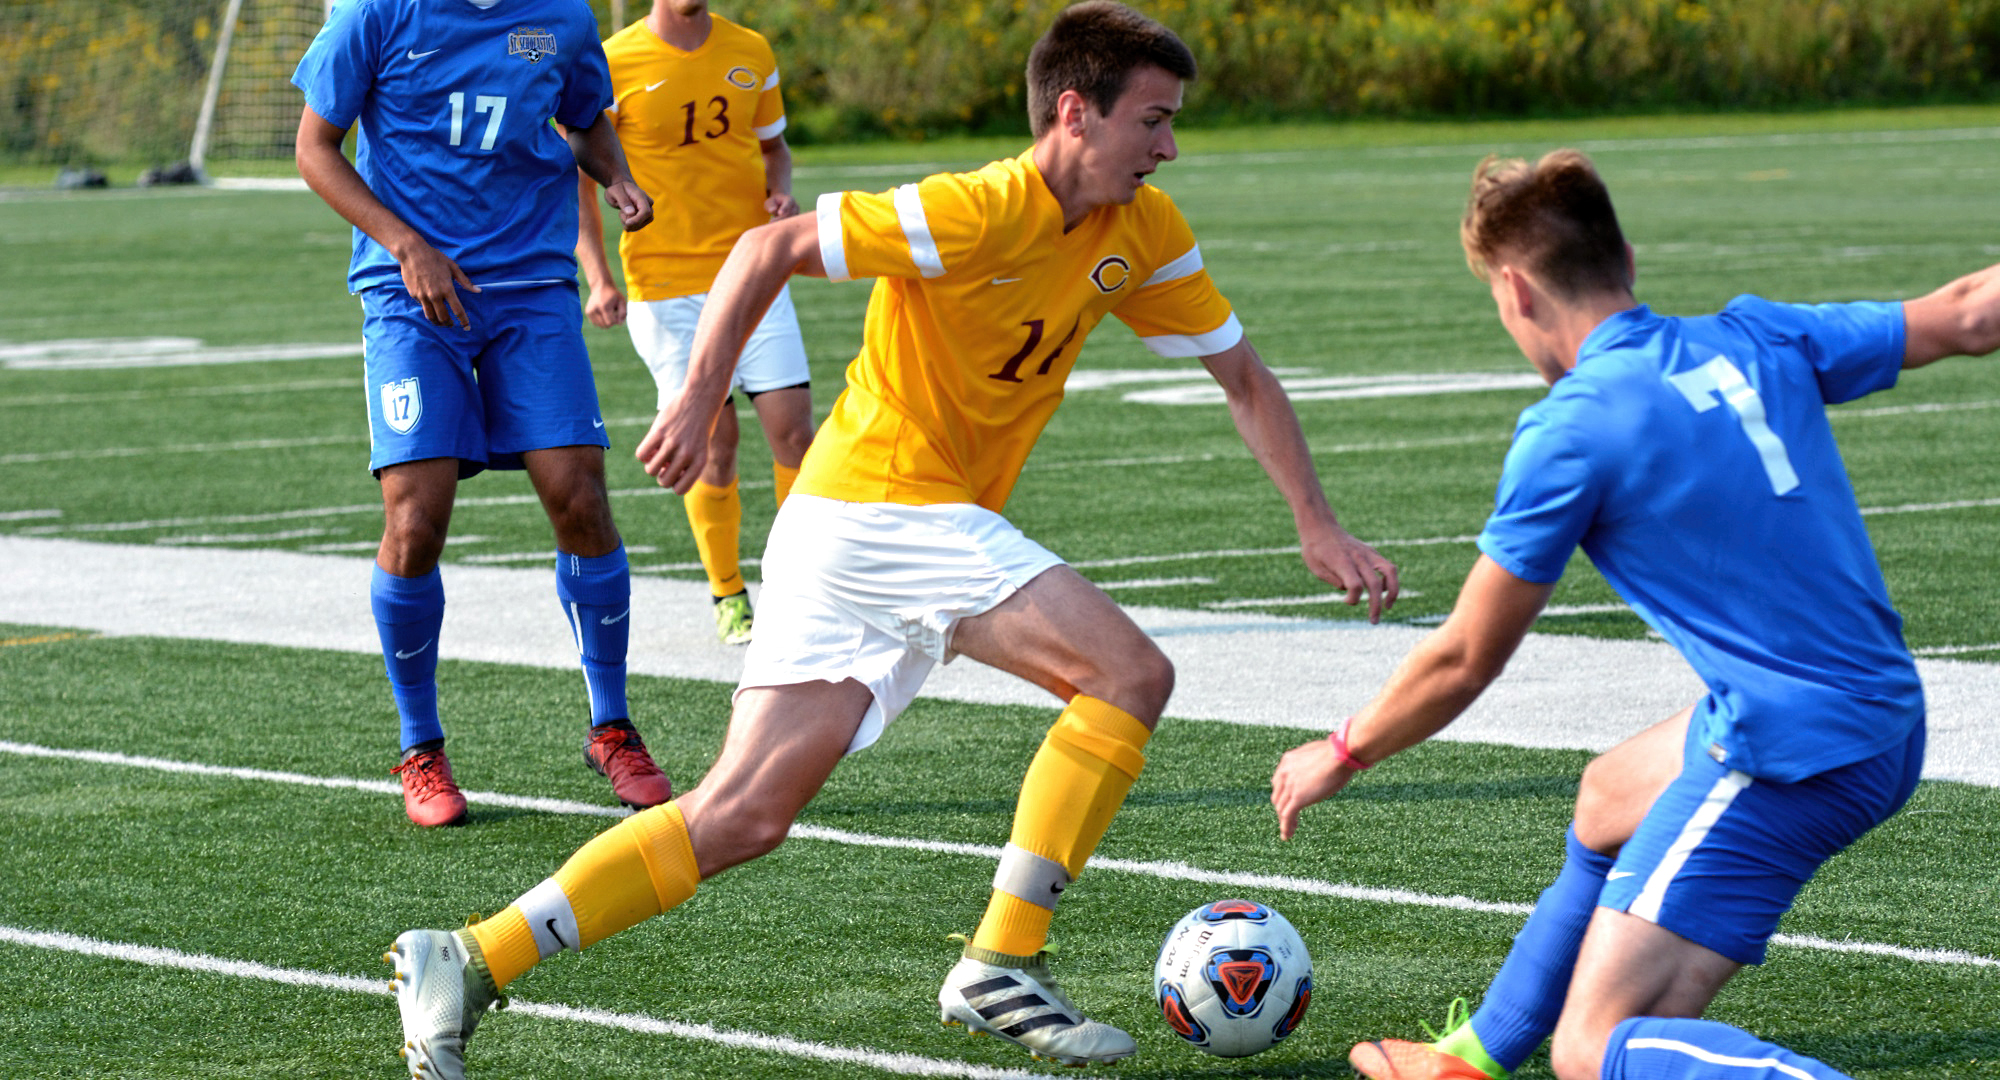 Sophomore Noah Gjesdahl eludes a St. Scholastica during the Cobbers' opening weekend of play. (Photo courtesy of St. Scholastica Sports Info Department)